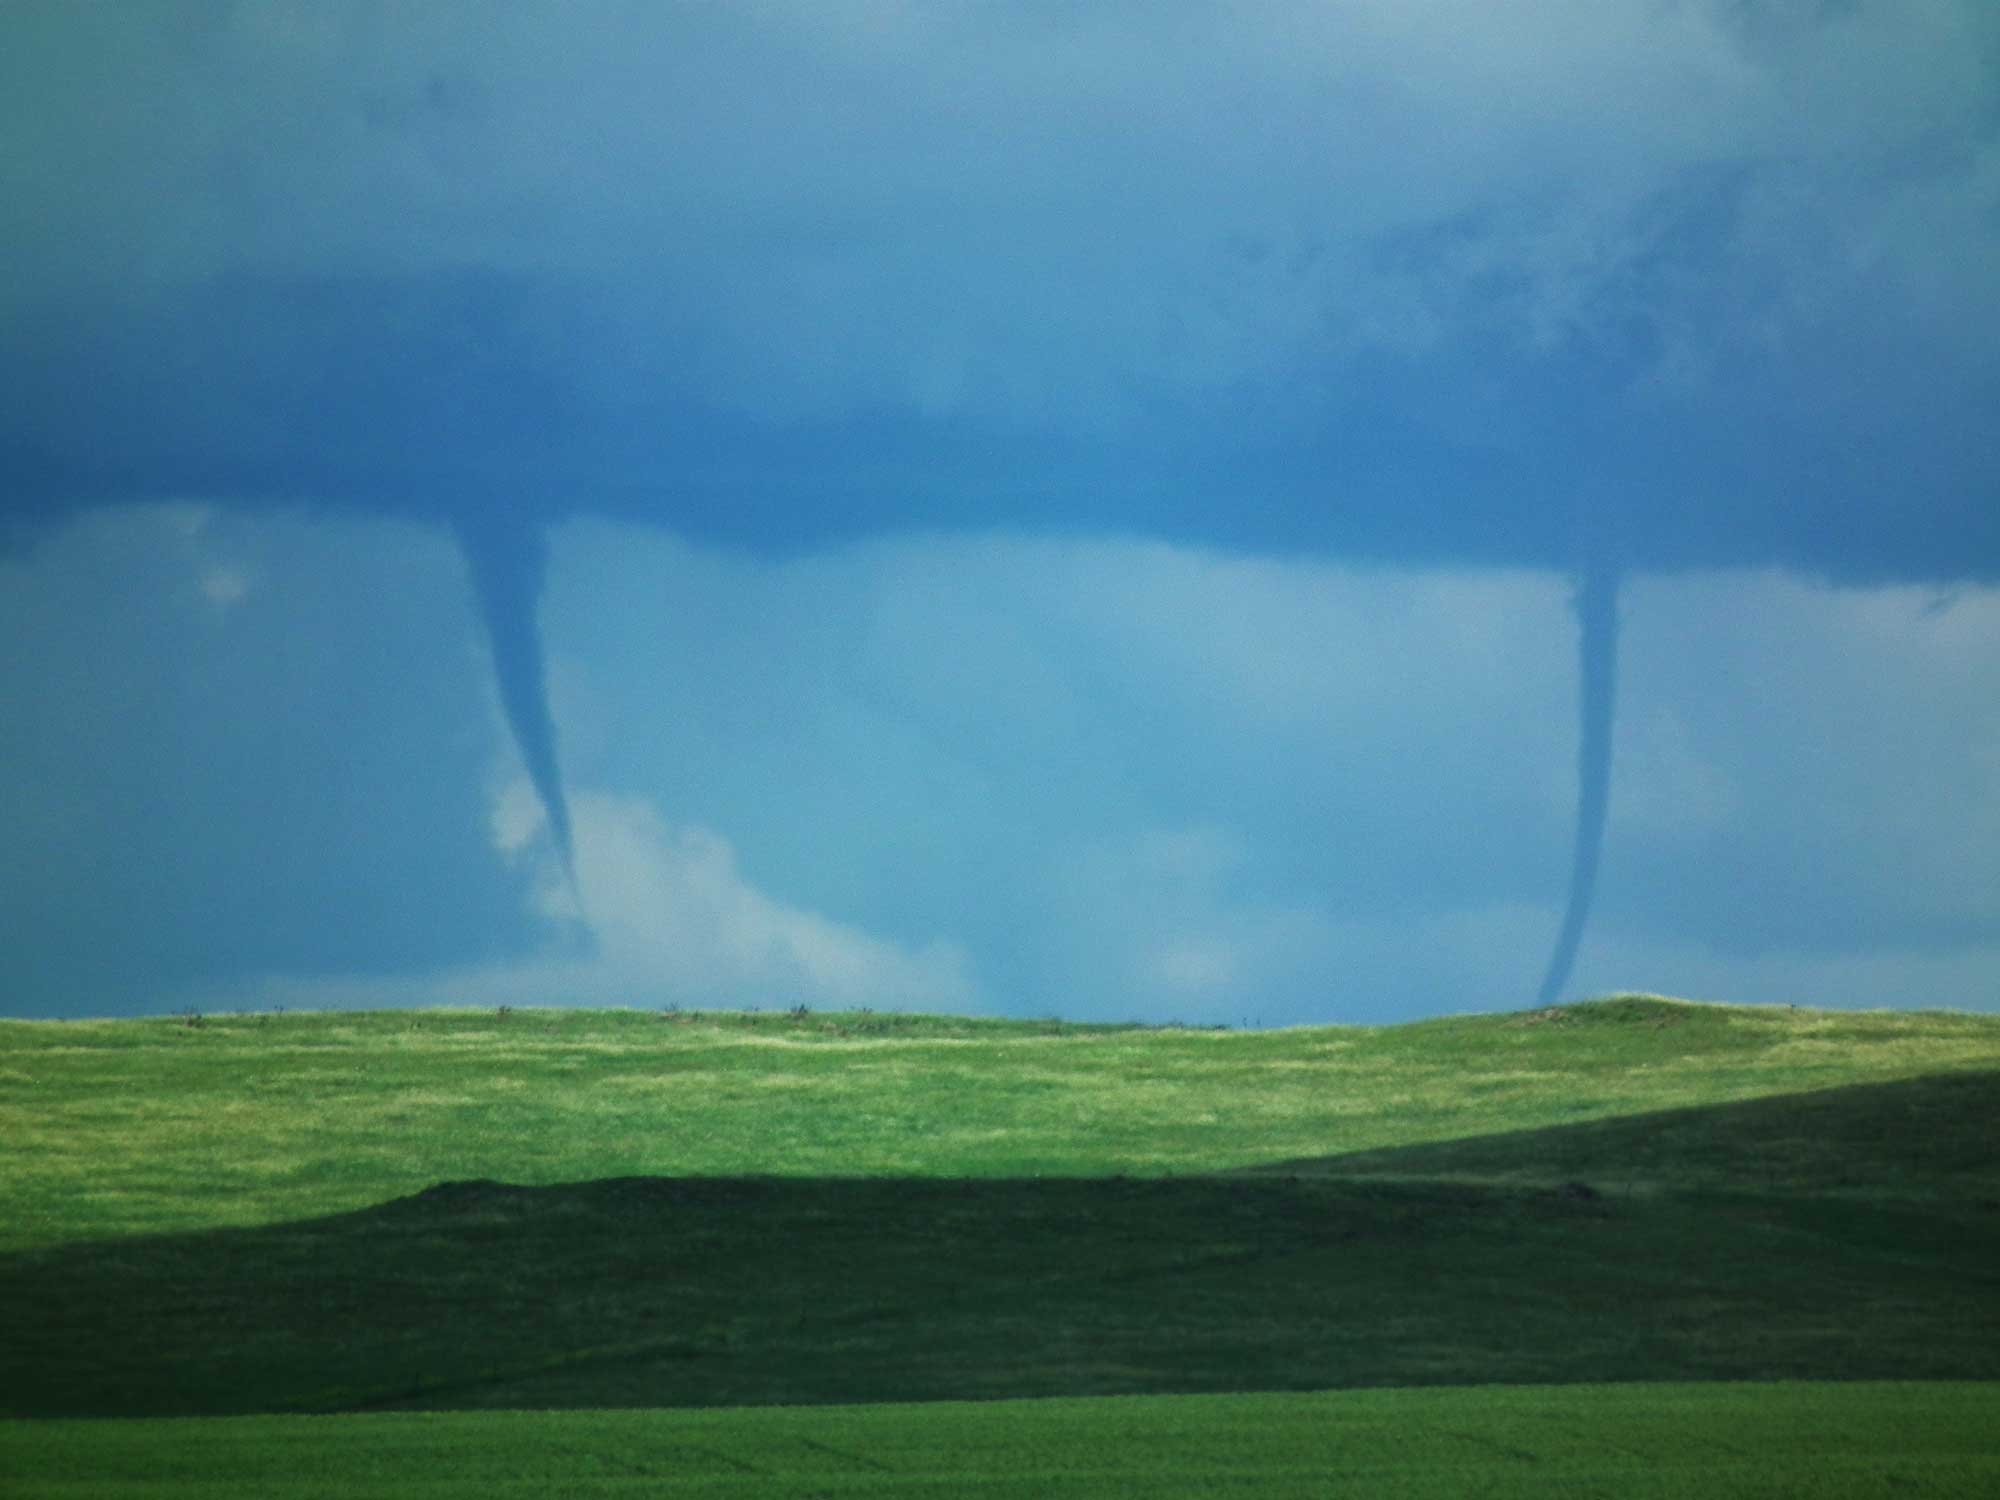 Photograph of two tornadoes touching down in a field at the same time in South Dakota.